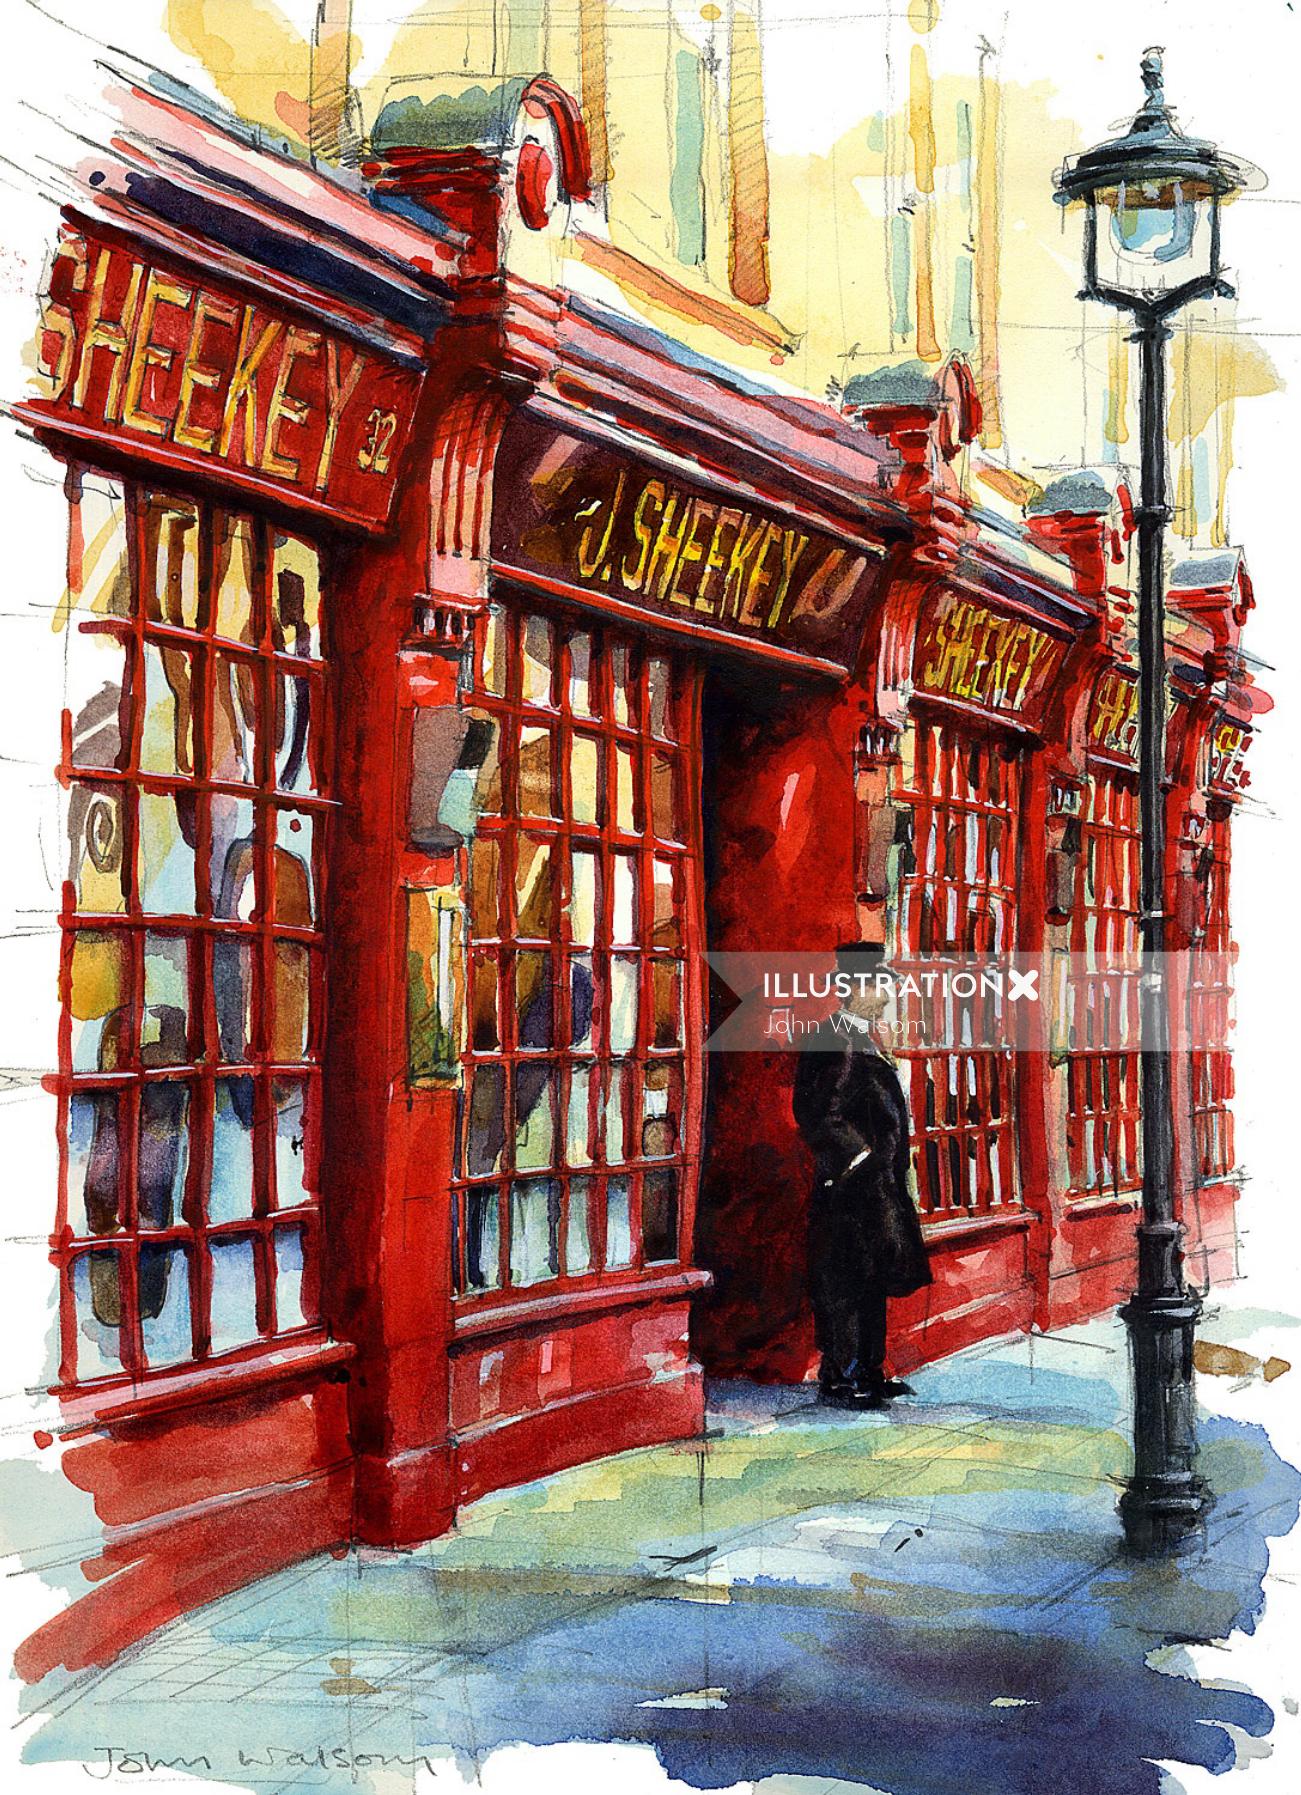 Sheekey's Restaurant architectural painting